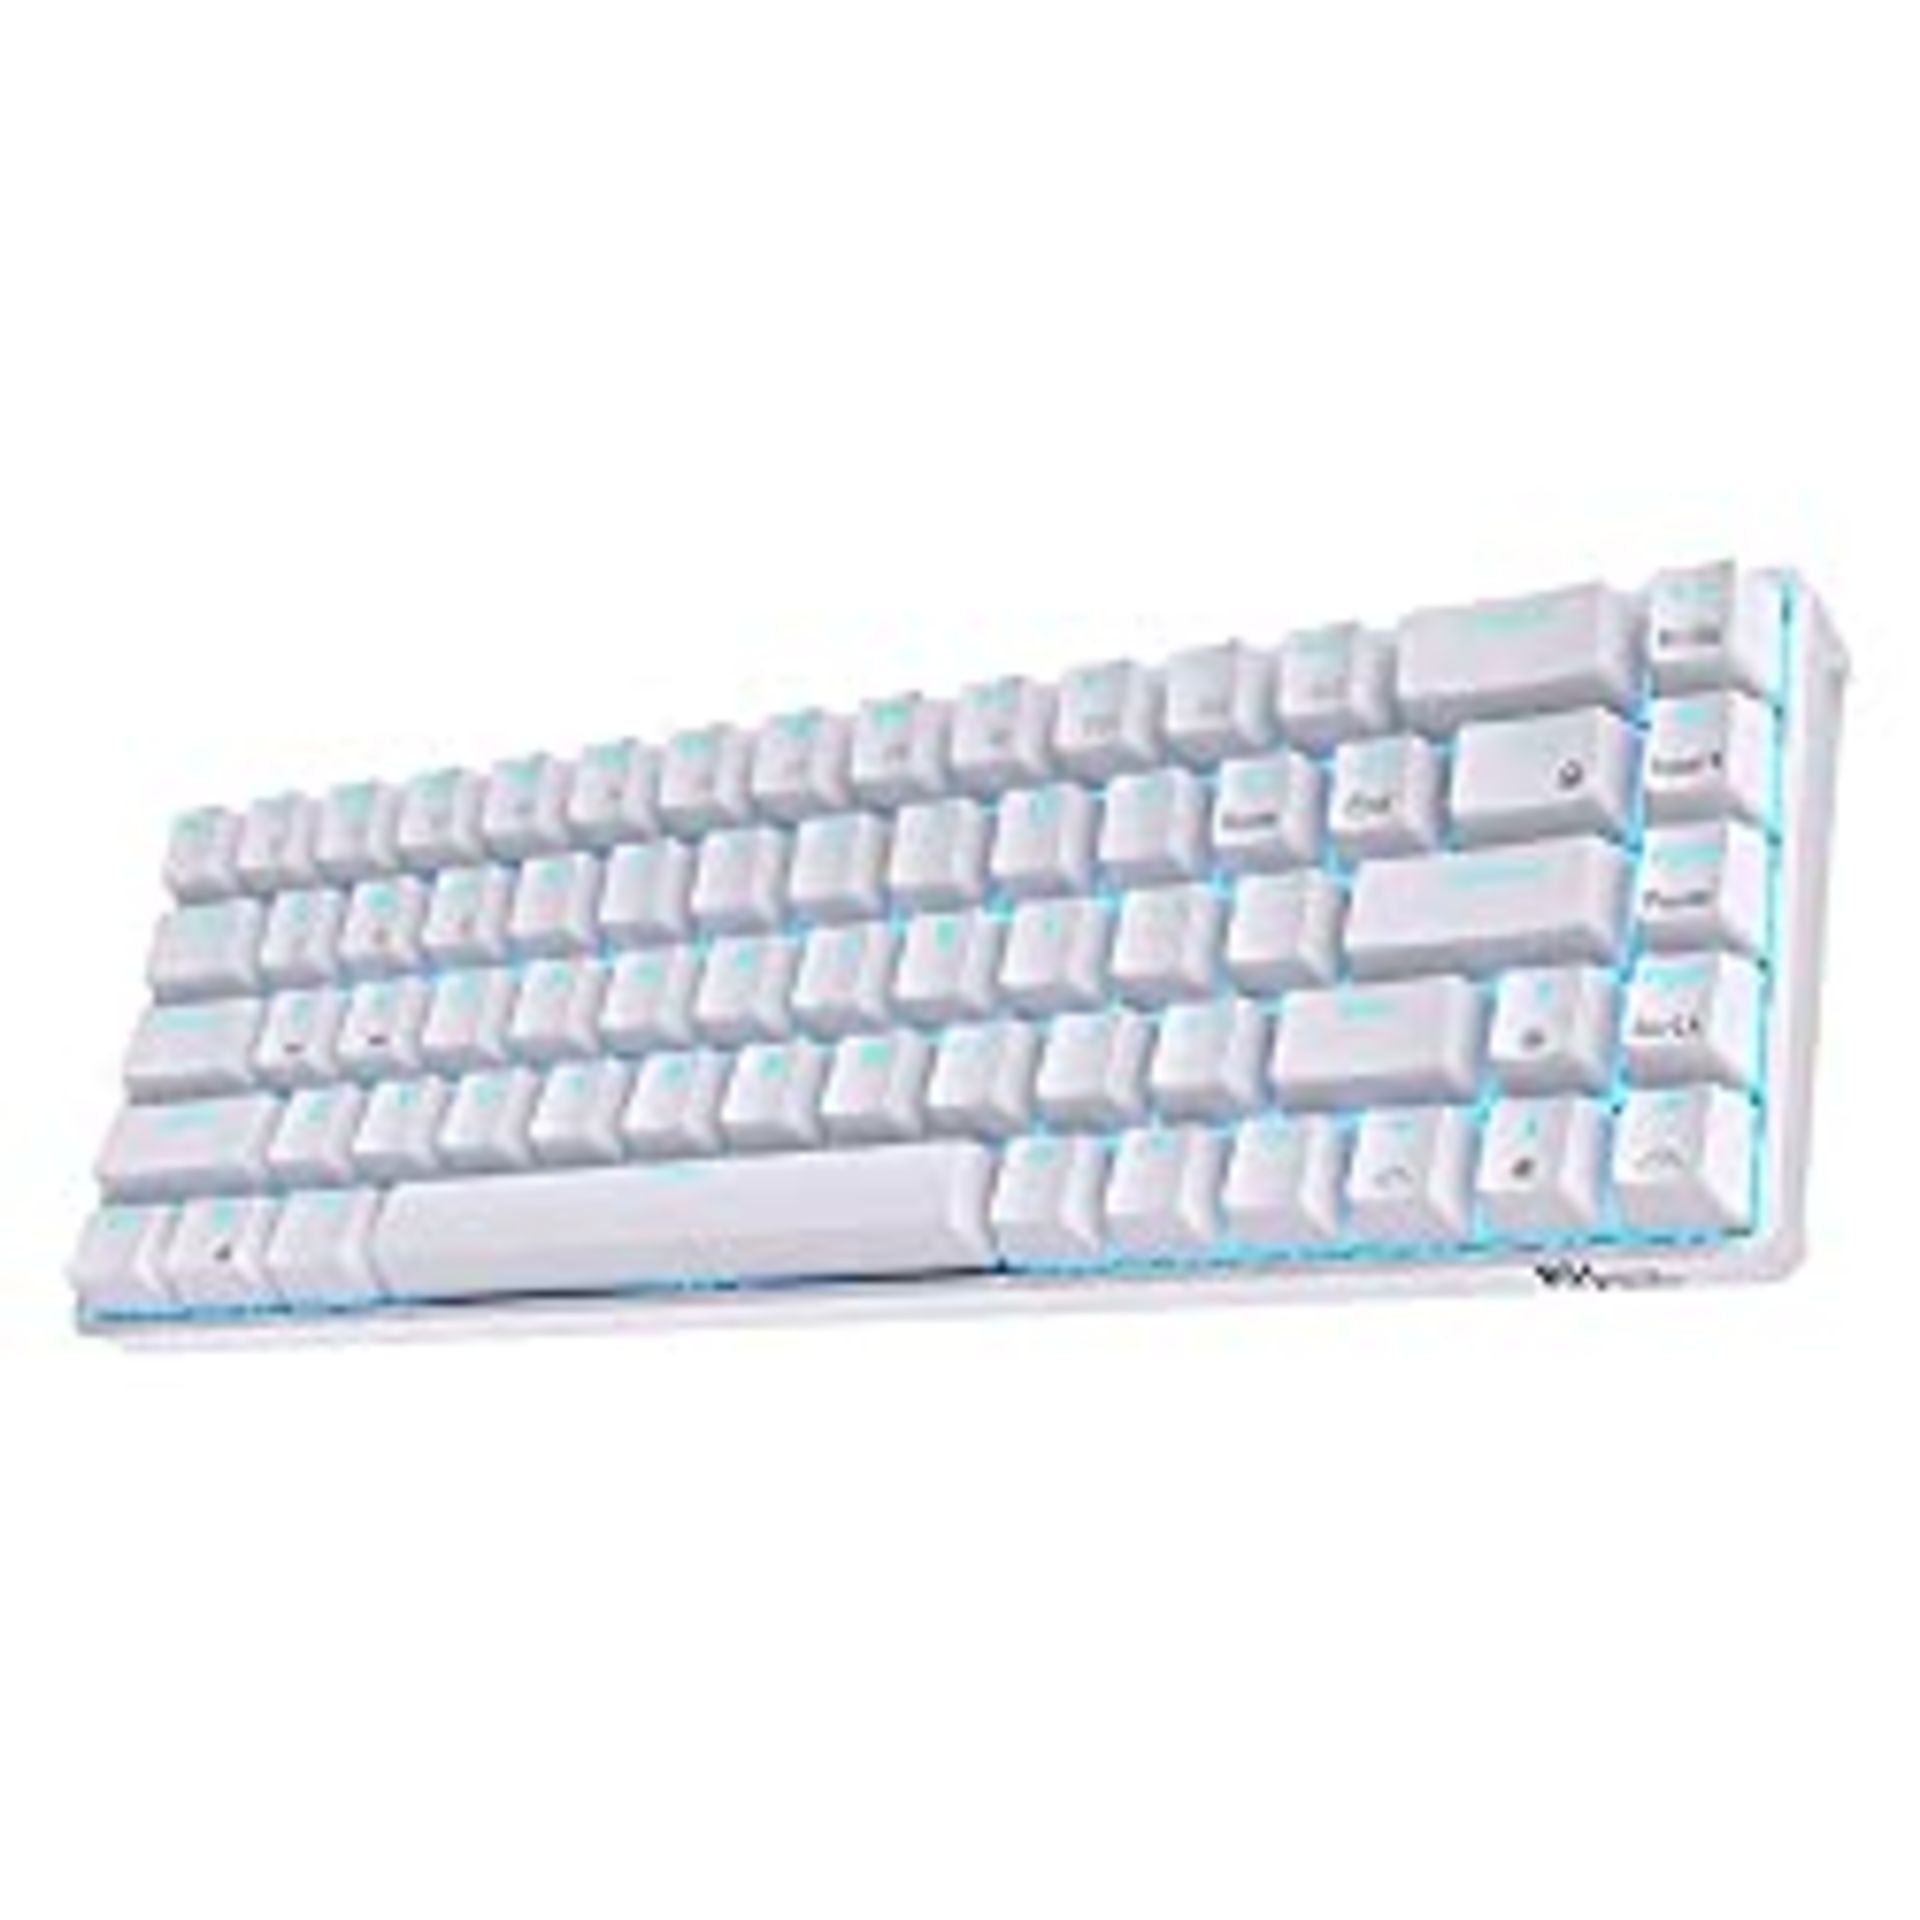 RRP £78.15 RK ROYAL KLUDGE RK68 Hot-Swappable 65% Wireless Mechanical Keyboard